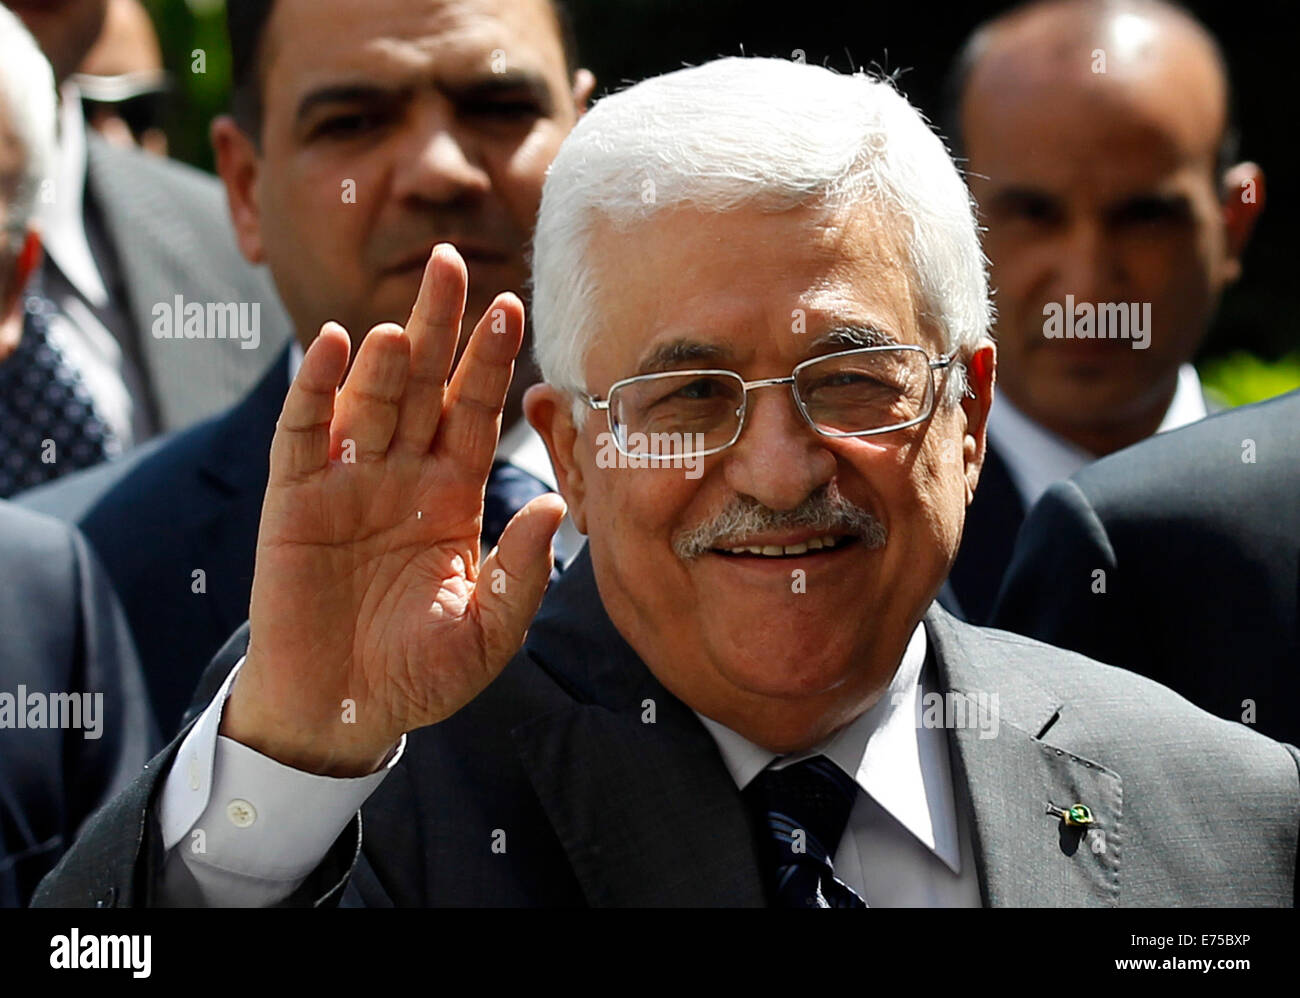 Cairo, Egypt. 7th Sep, 2014. Palestinian President Mahmoud Abbas waves as he attends an Arab League emergency meeting in Cairo, Egypt, Sept. 7, 2014. Arab foreign ministers were expected to issue a resolution to confront militants overrunning large areas of Iraq and Syria and declared a cross-border Islamic States. Credit:  Ahmed Gomaa/Xinhua/Alamy Live News Stock Photo